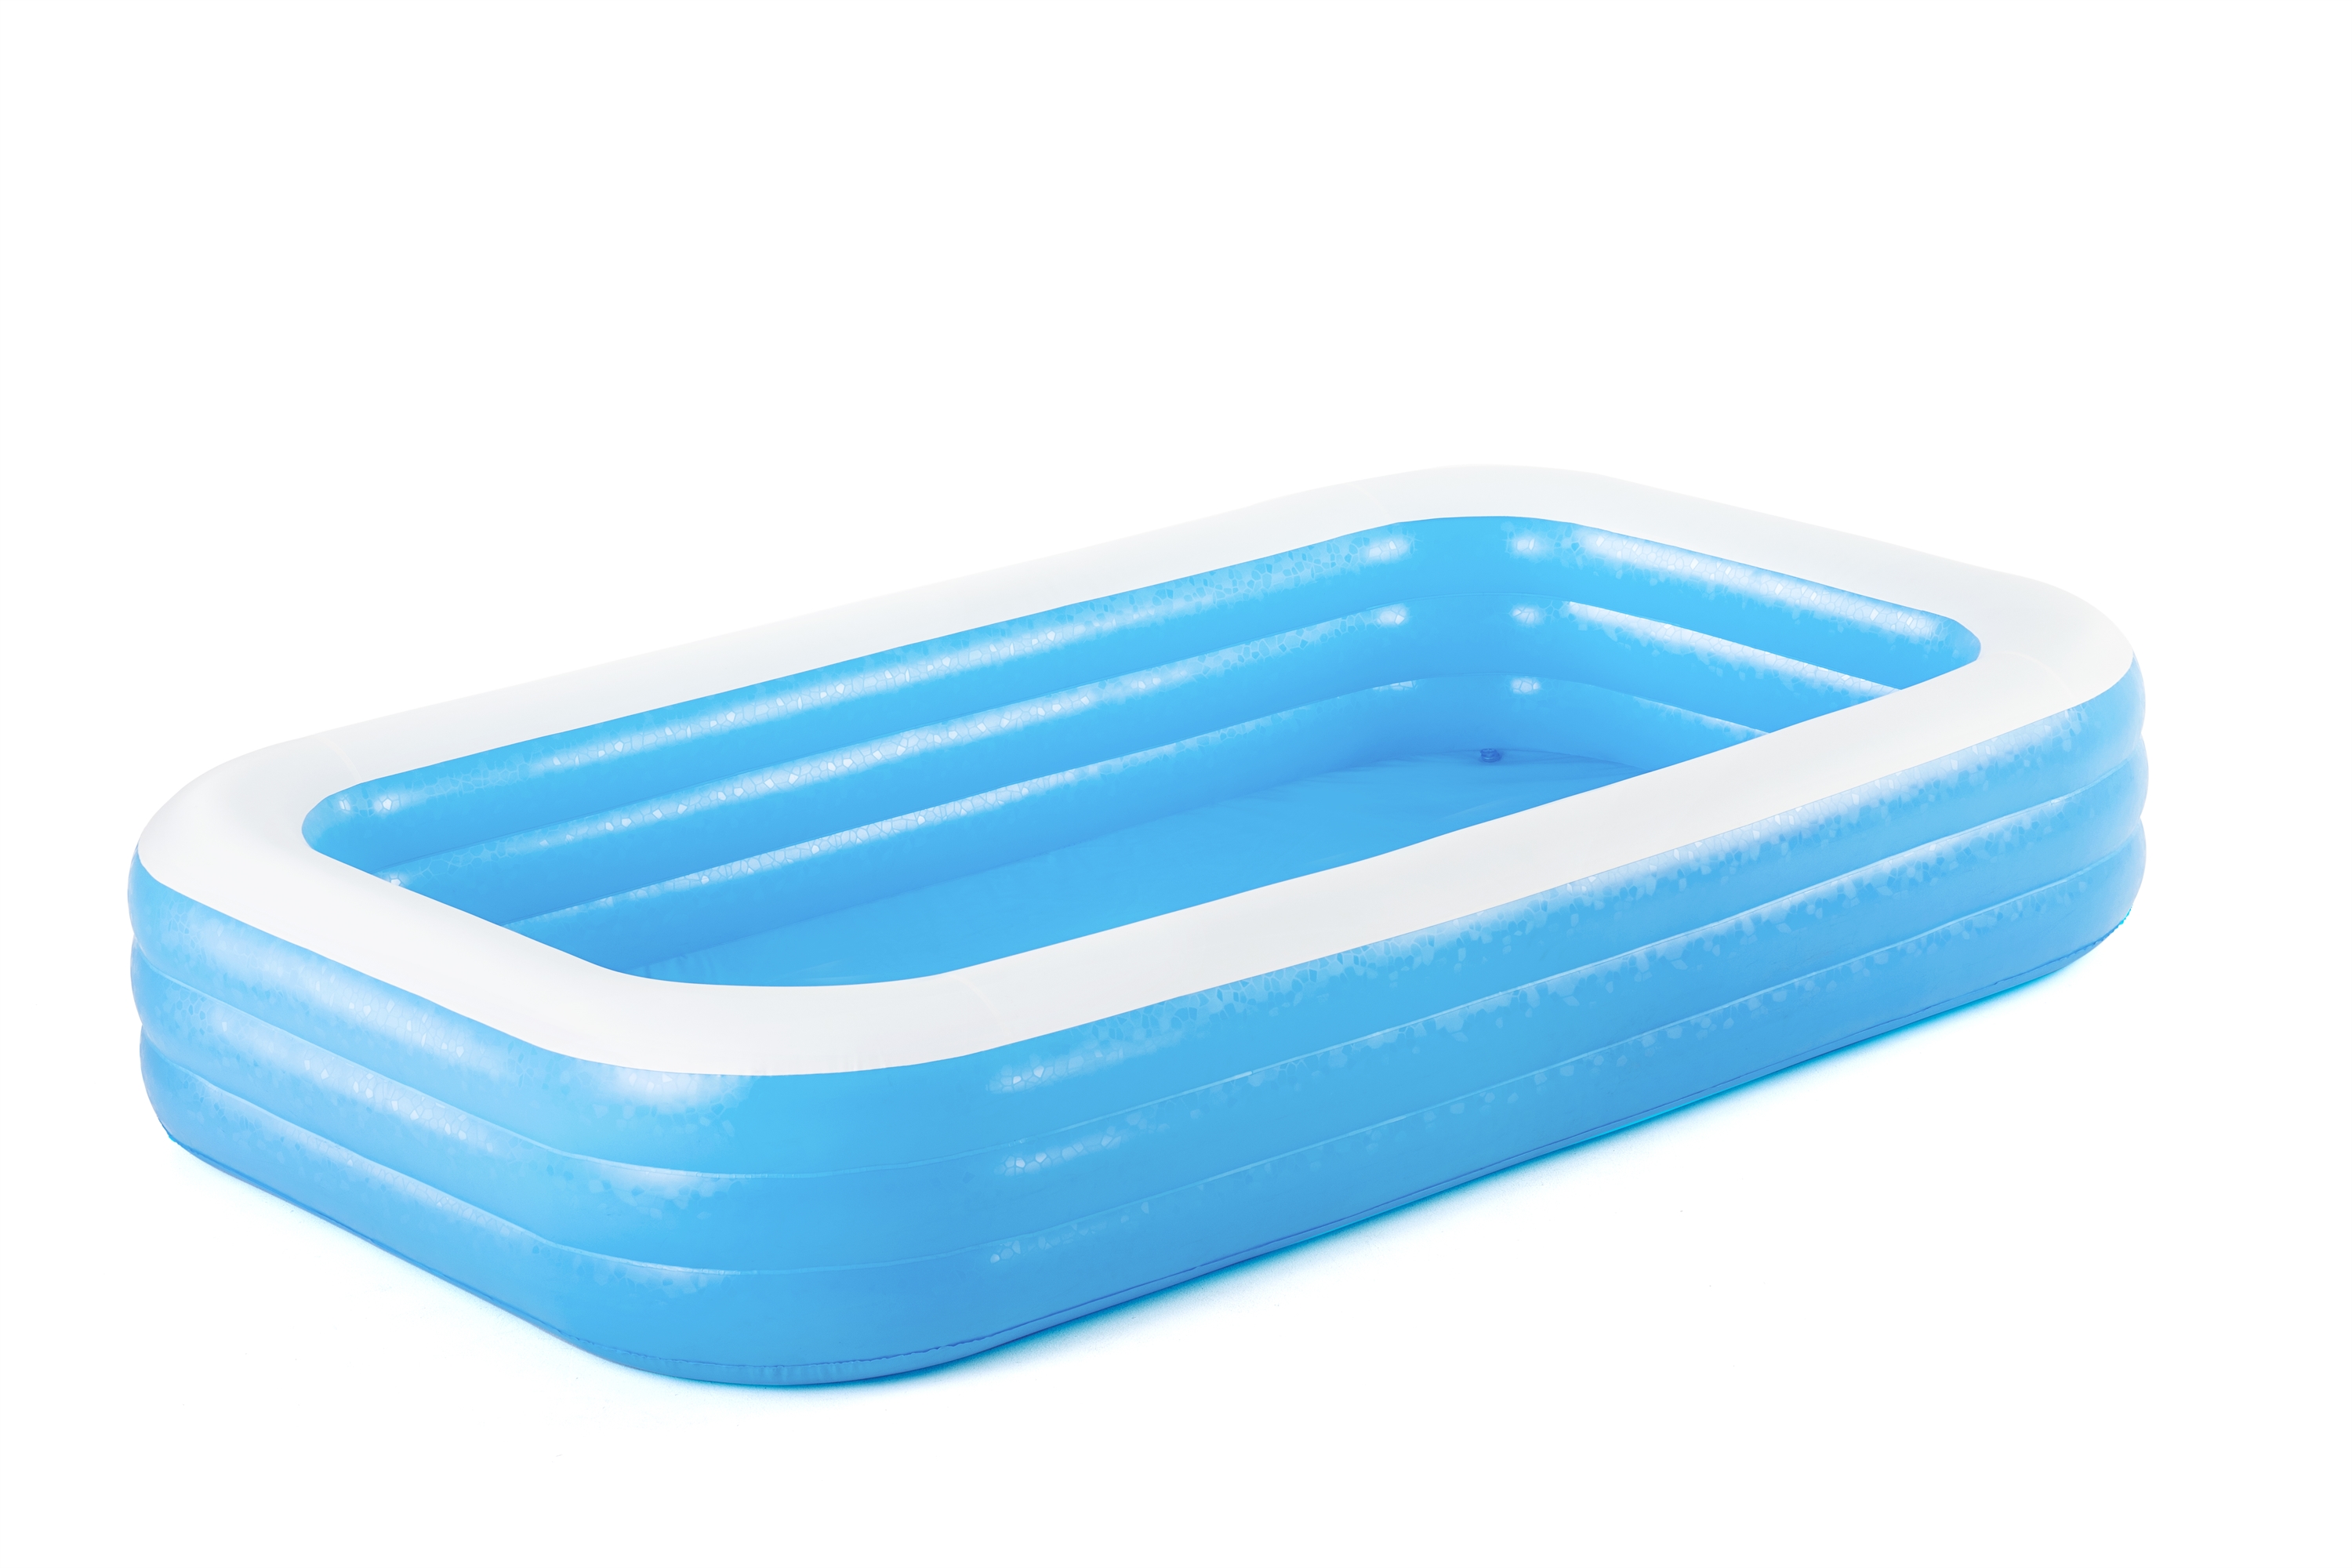 Bestway 54009 LARGE FAMILY SWIMMING POOL 305cm x 1..